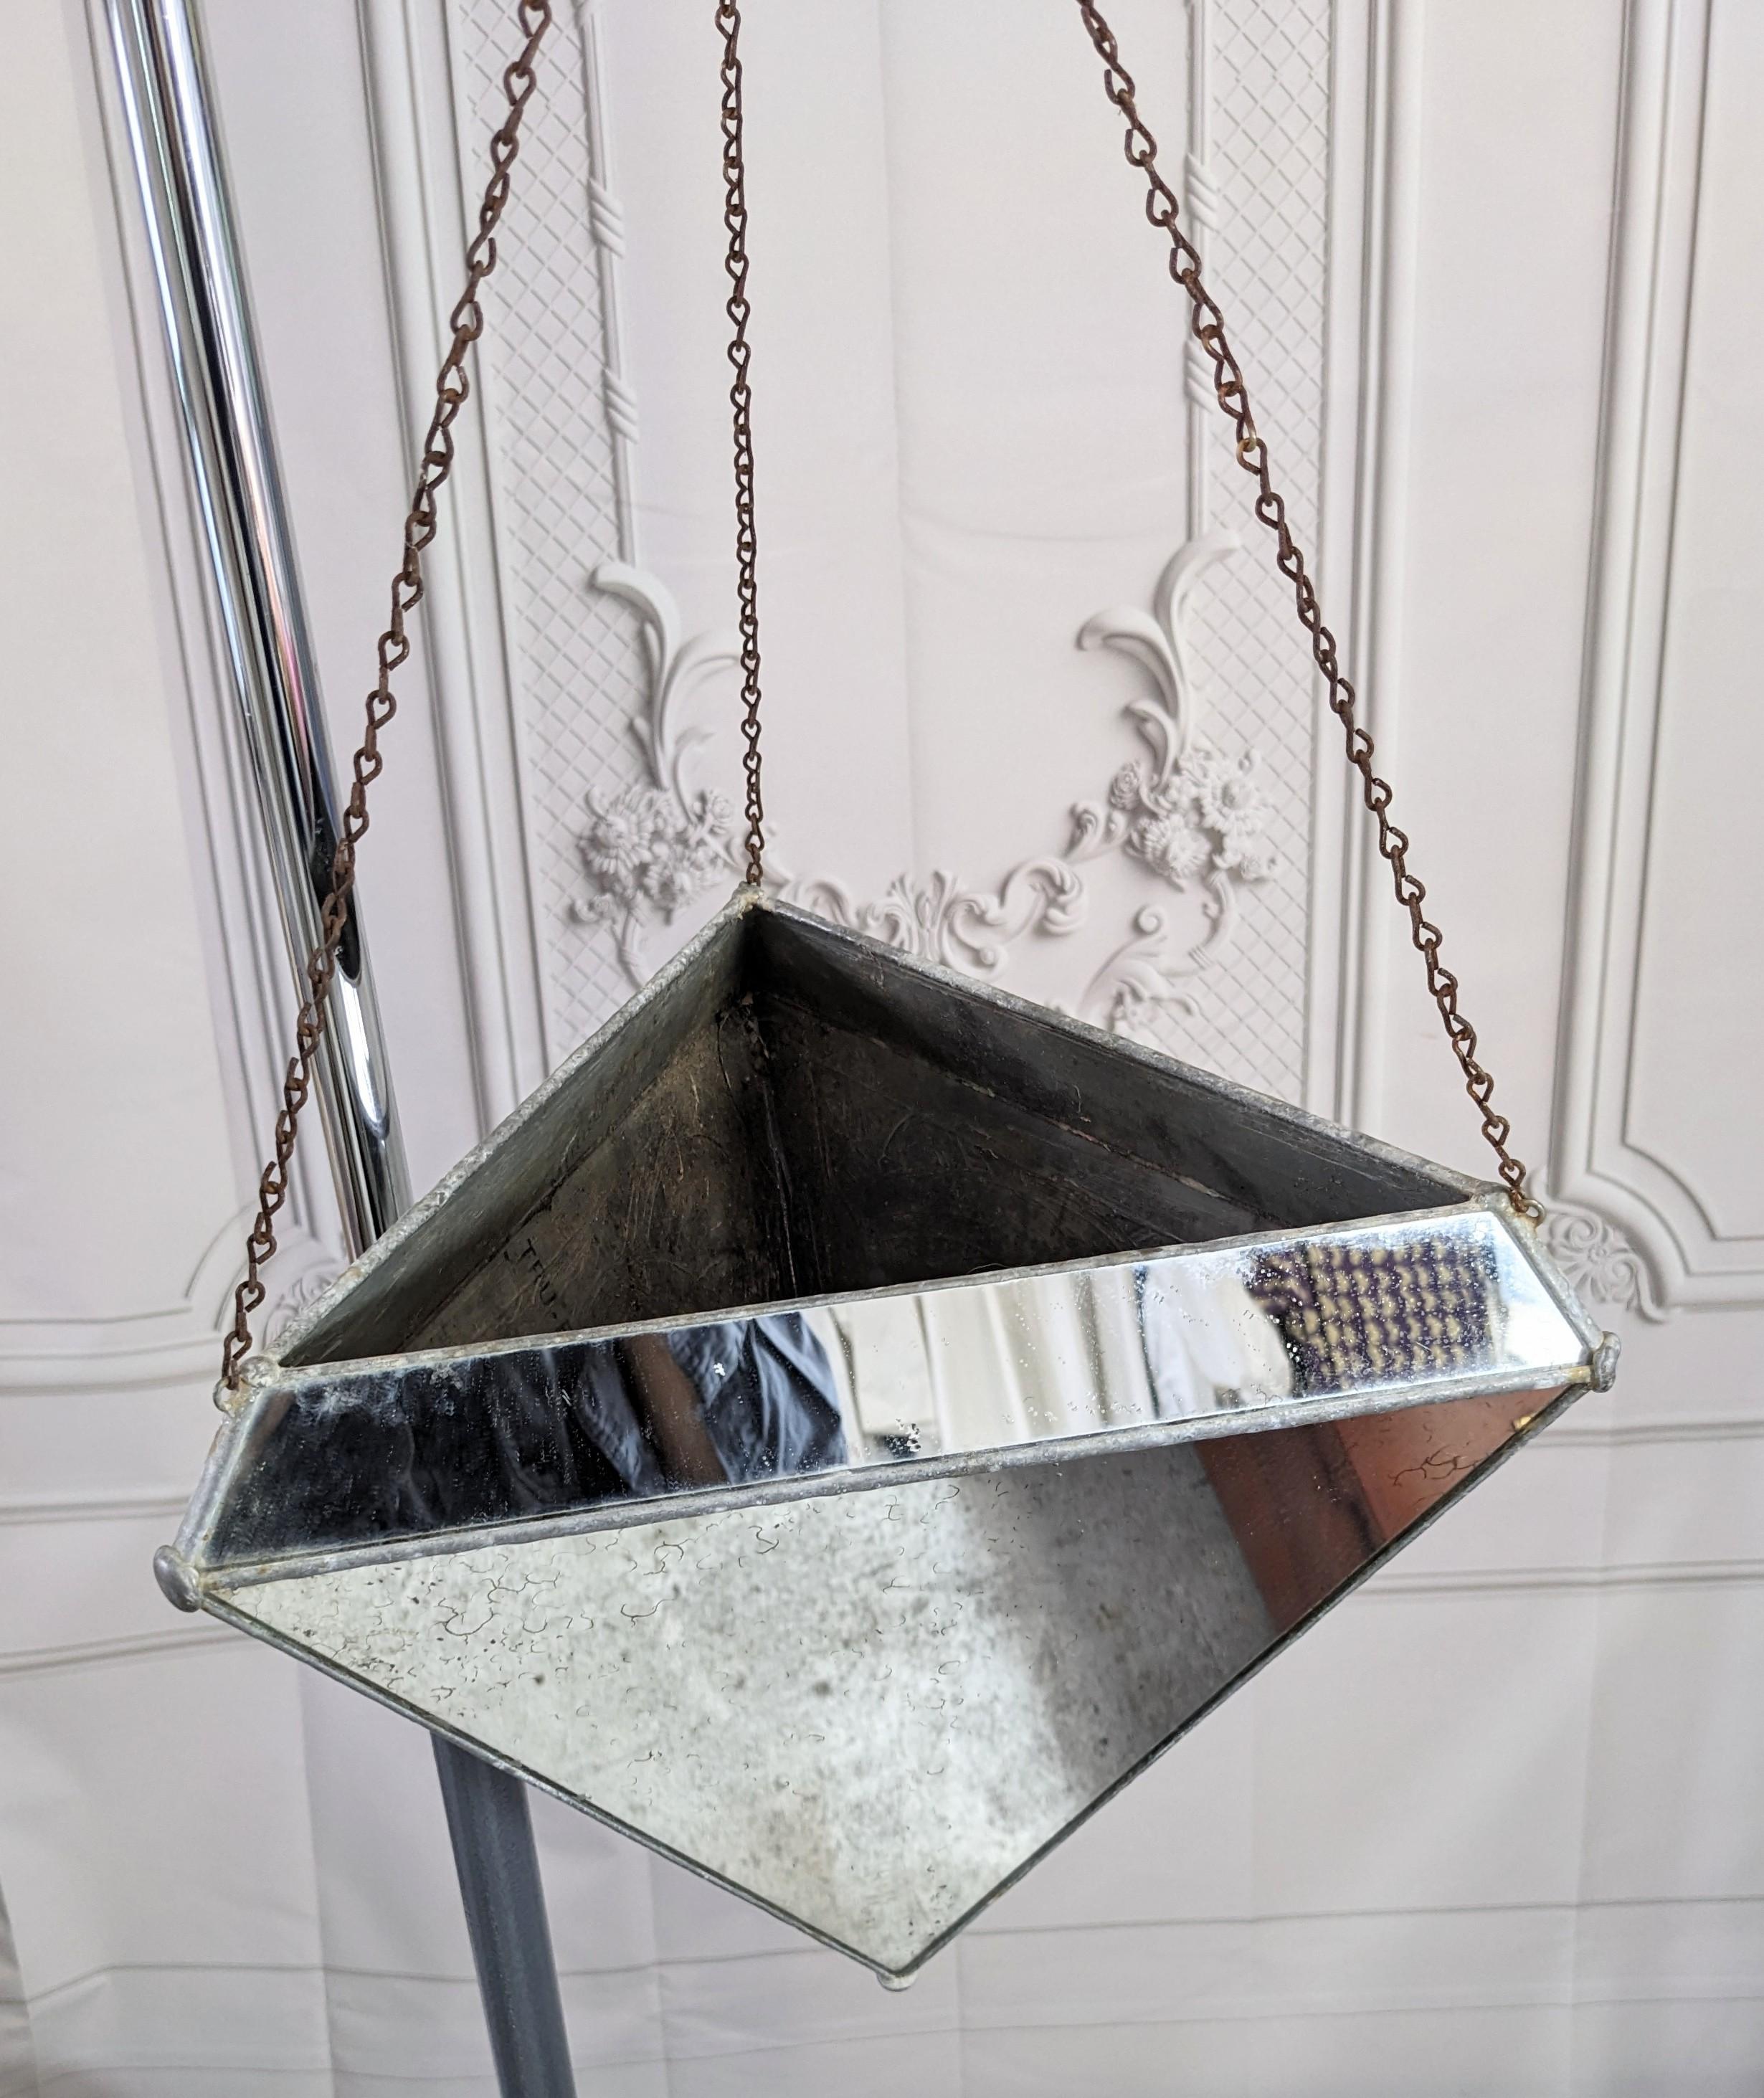 American 1970s Mirrored Triangular Hanging Planter For Sale